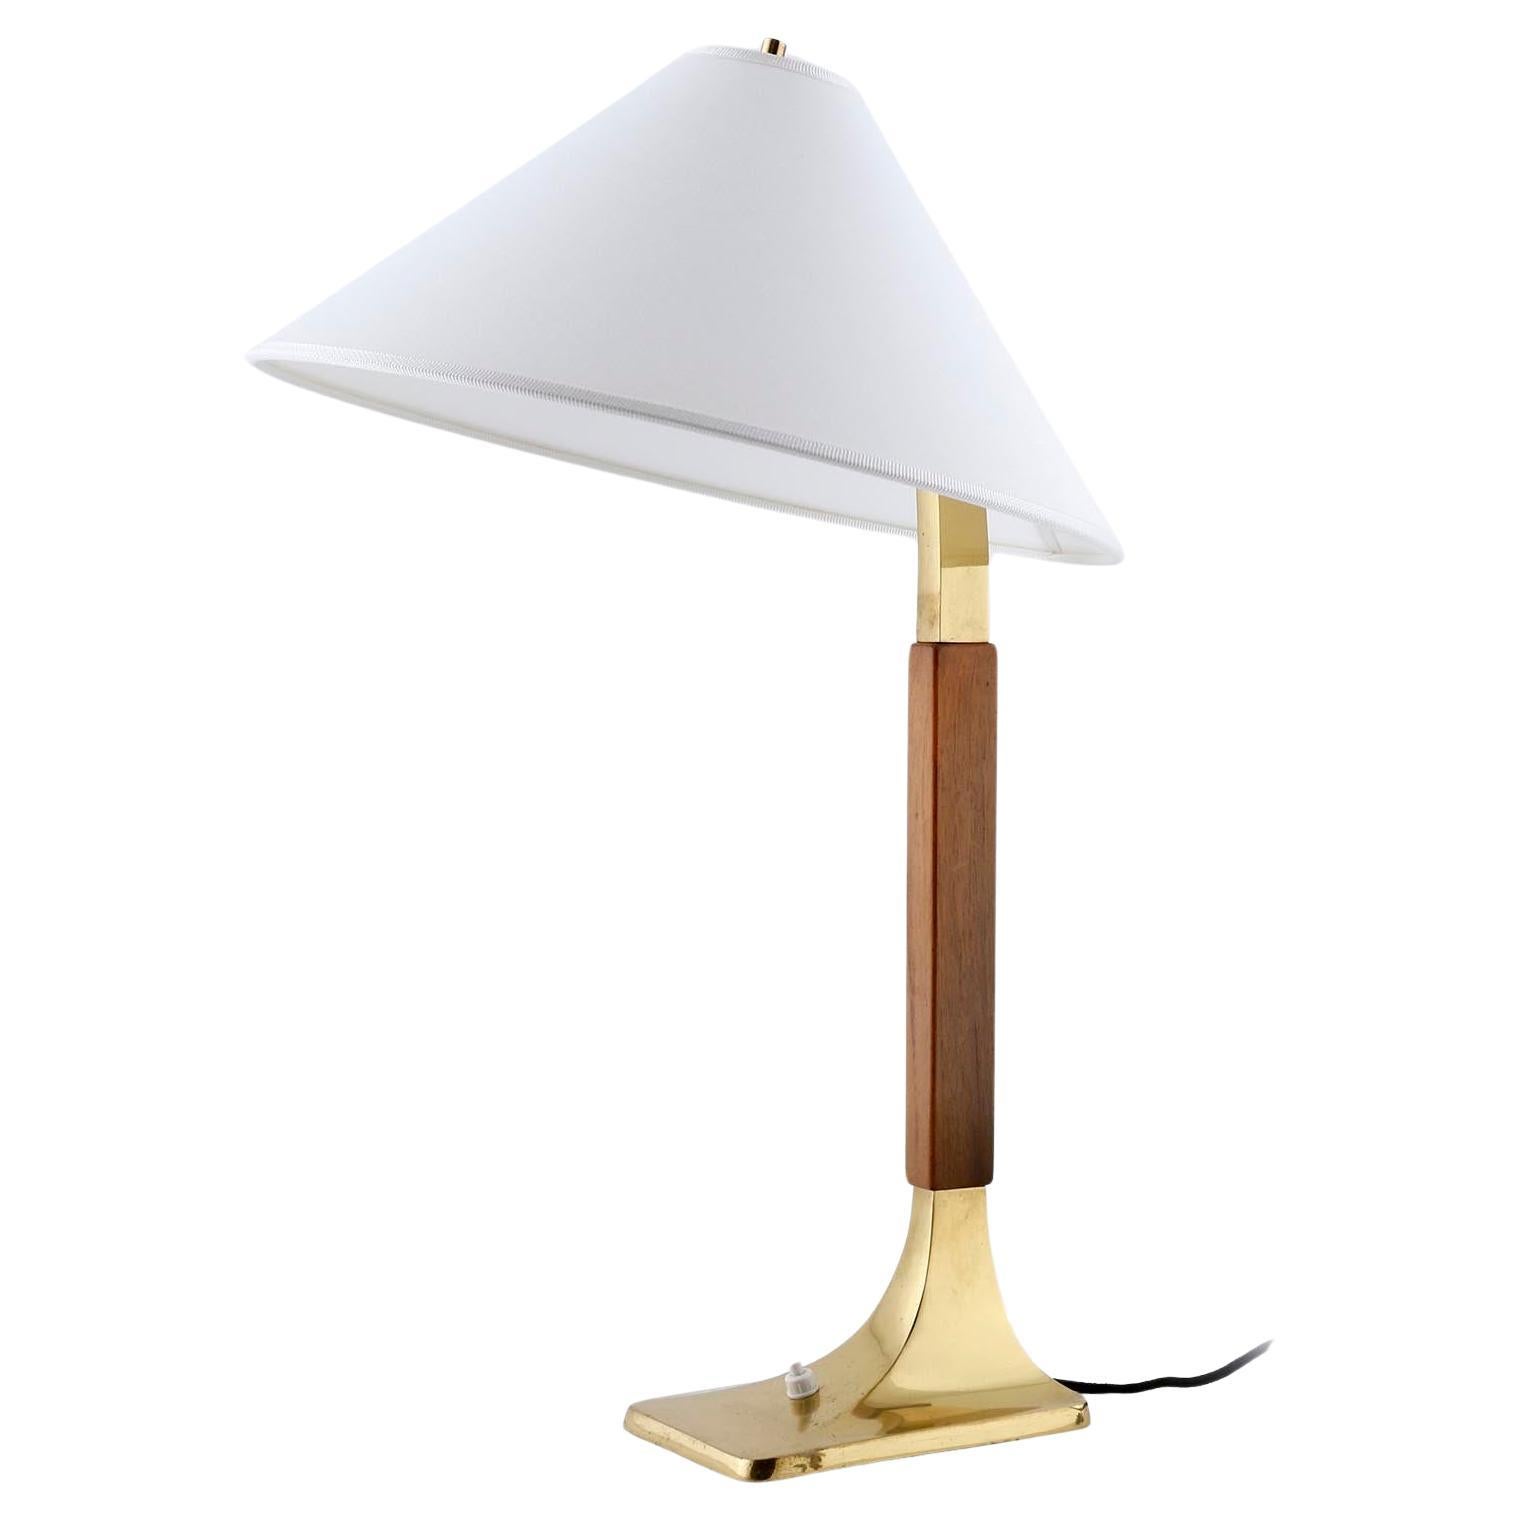 A fantastic table or desk lamp made of polished brass and walnut wood manufactured in Austria, Vienna, ca. 1960 (late 1950s or early 1960s). The piece is attributed to Austrian lighting maker J.T. Kalmar.
The lamp shade is renewed with a white